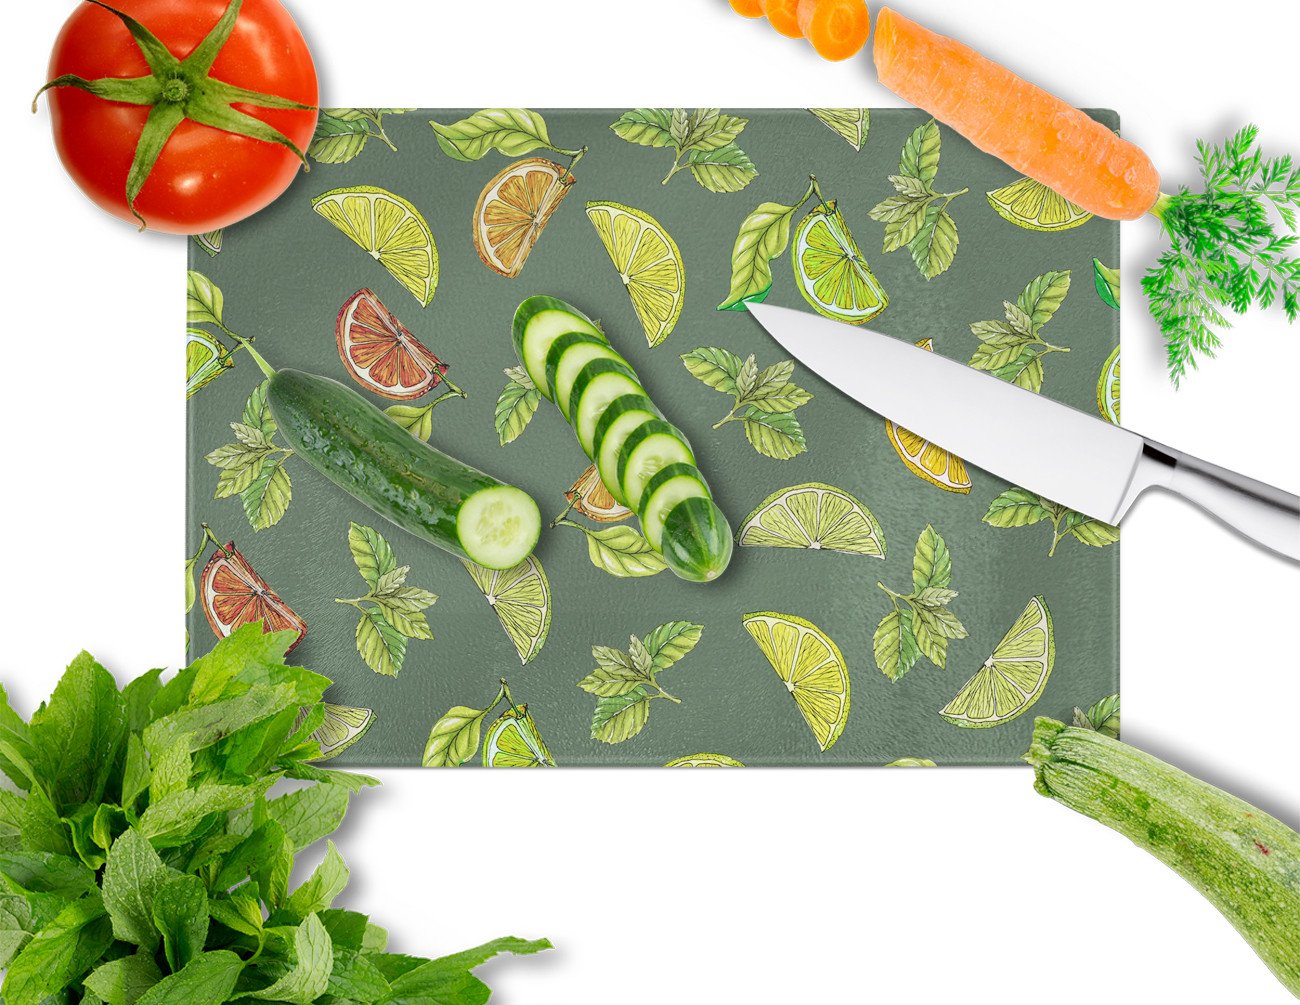 Lemons, Limes and Oranges Glass Cutting Board Large BB5207LCB by Caroline's Treasures